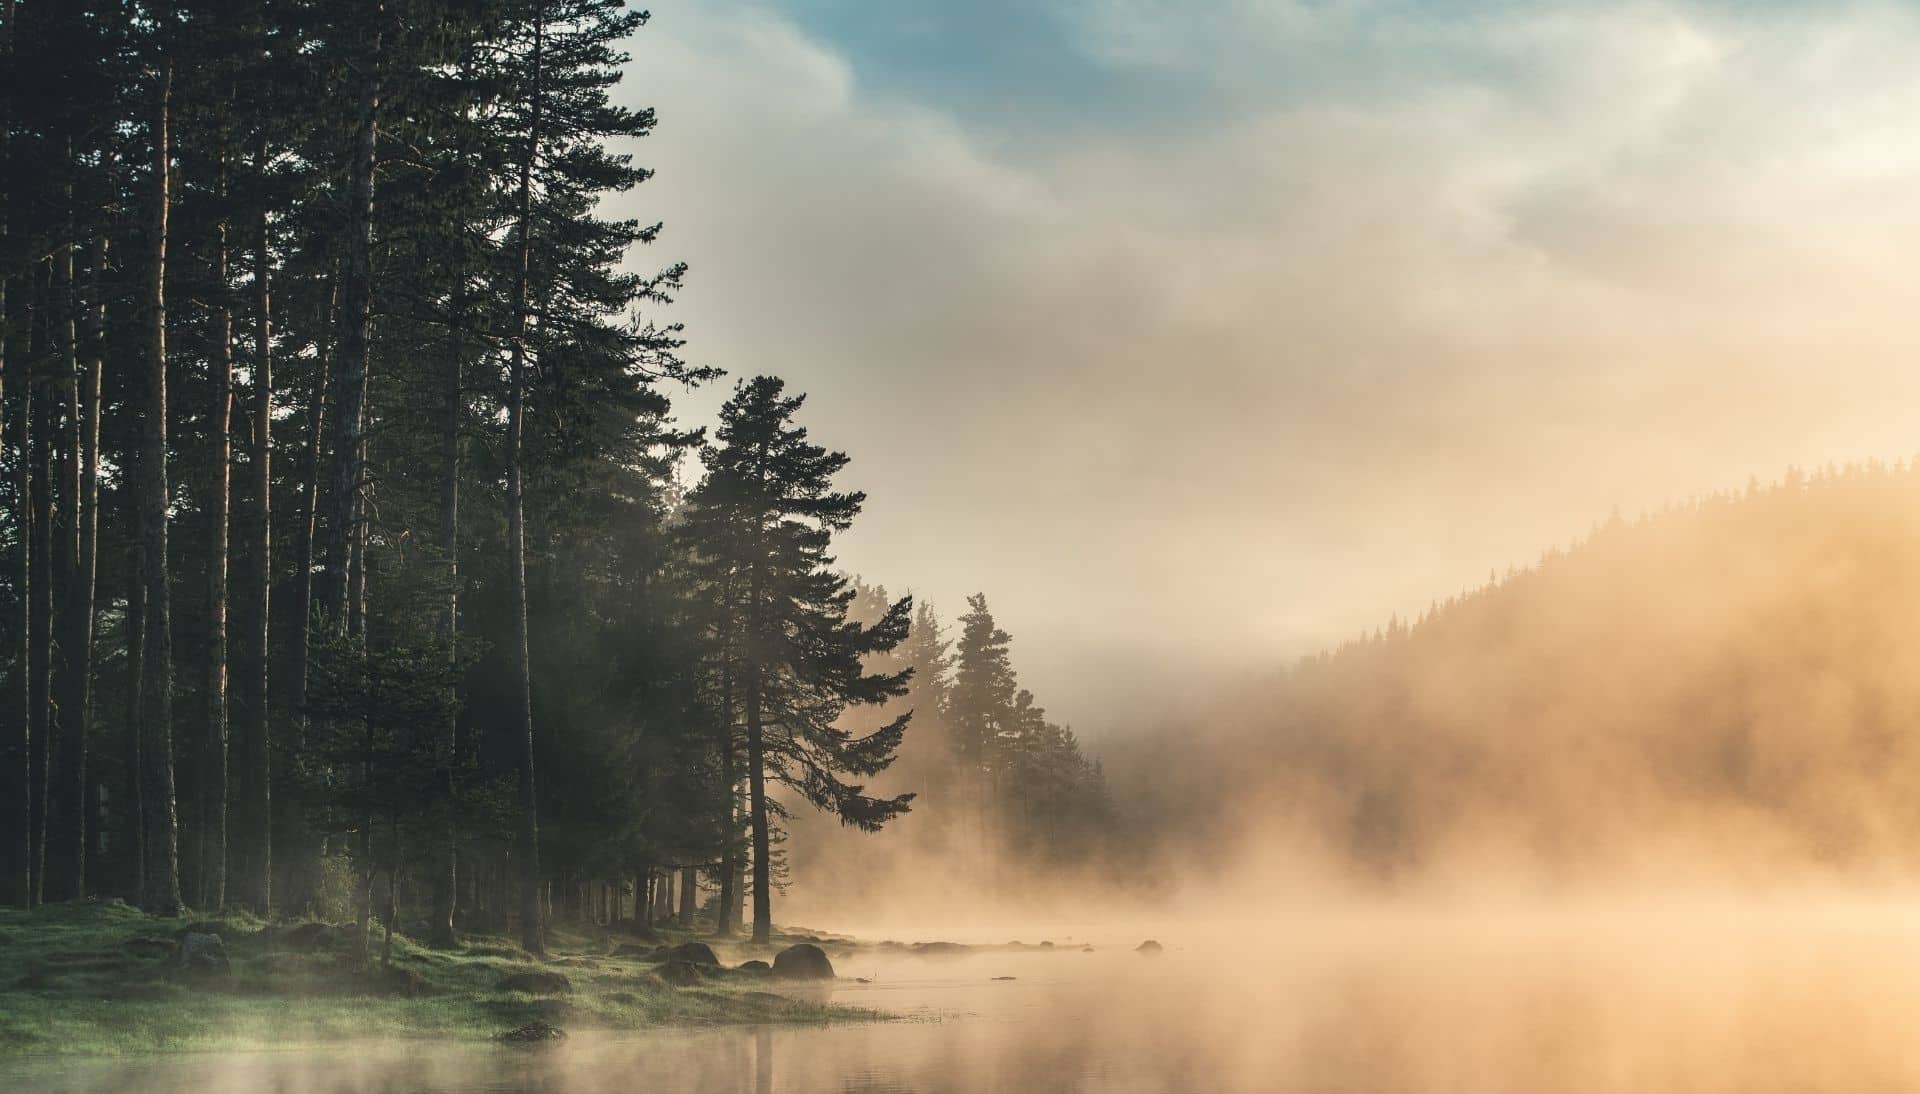 photo of a forest next to a misty lake